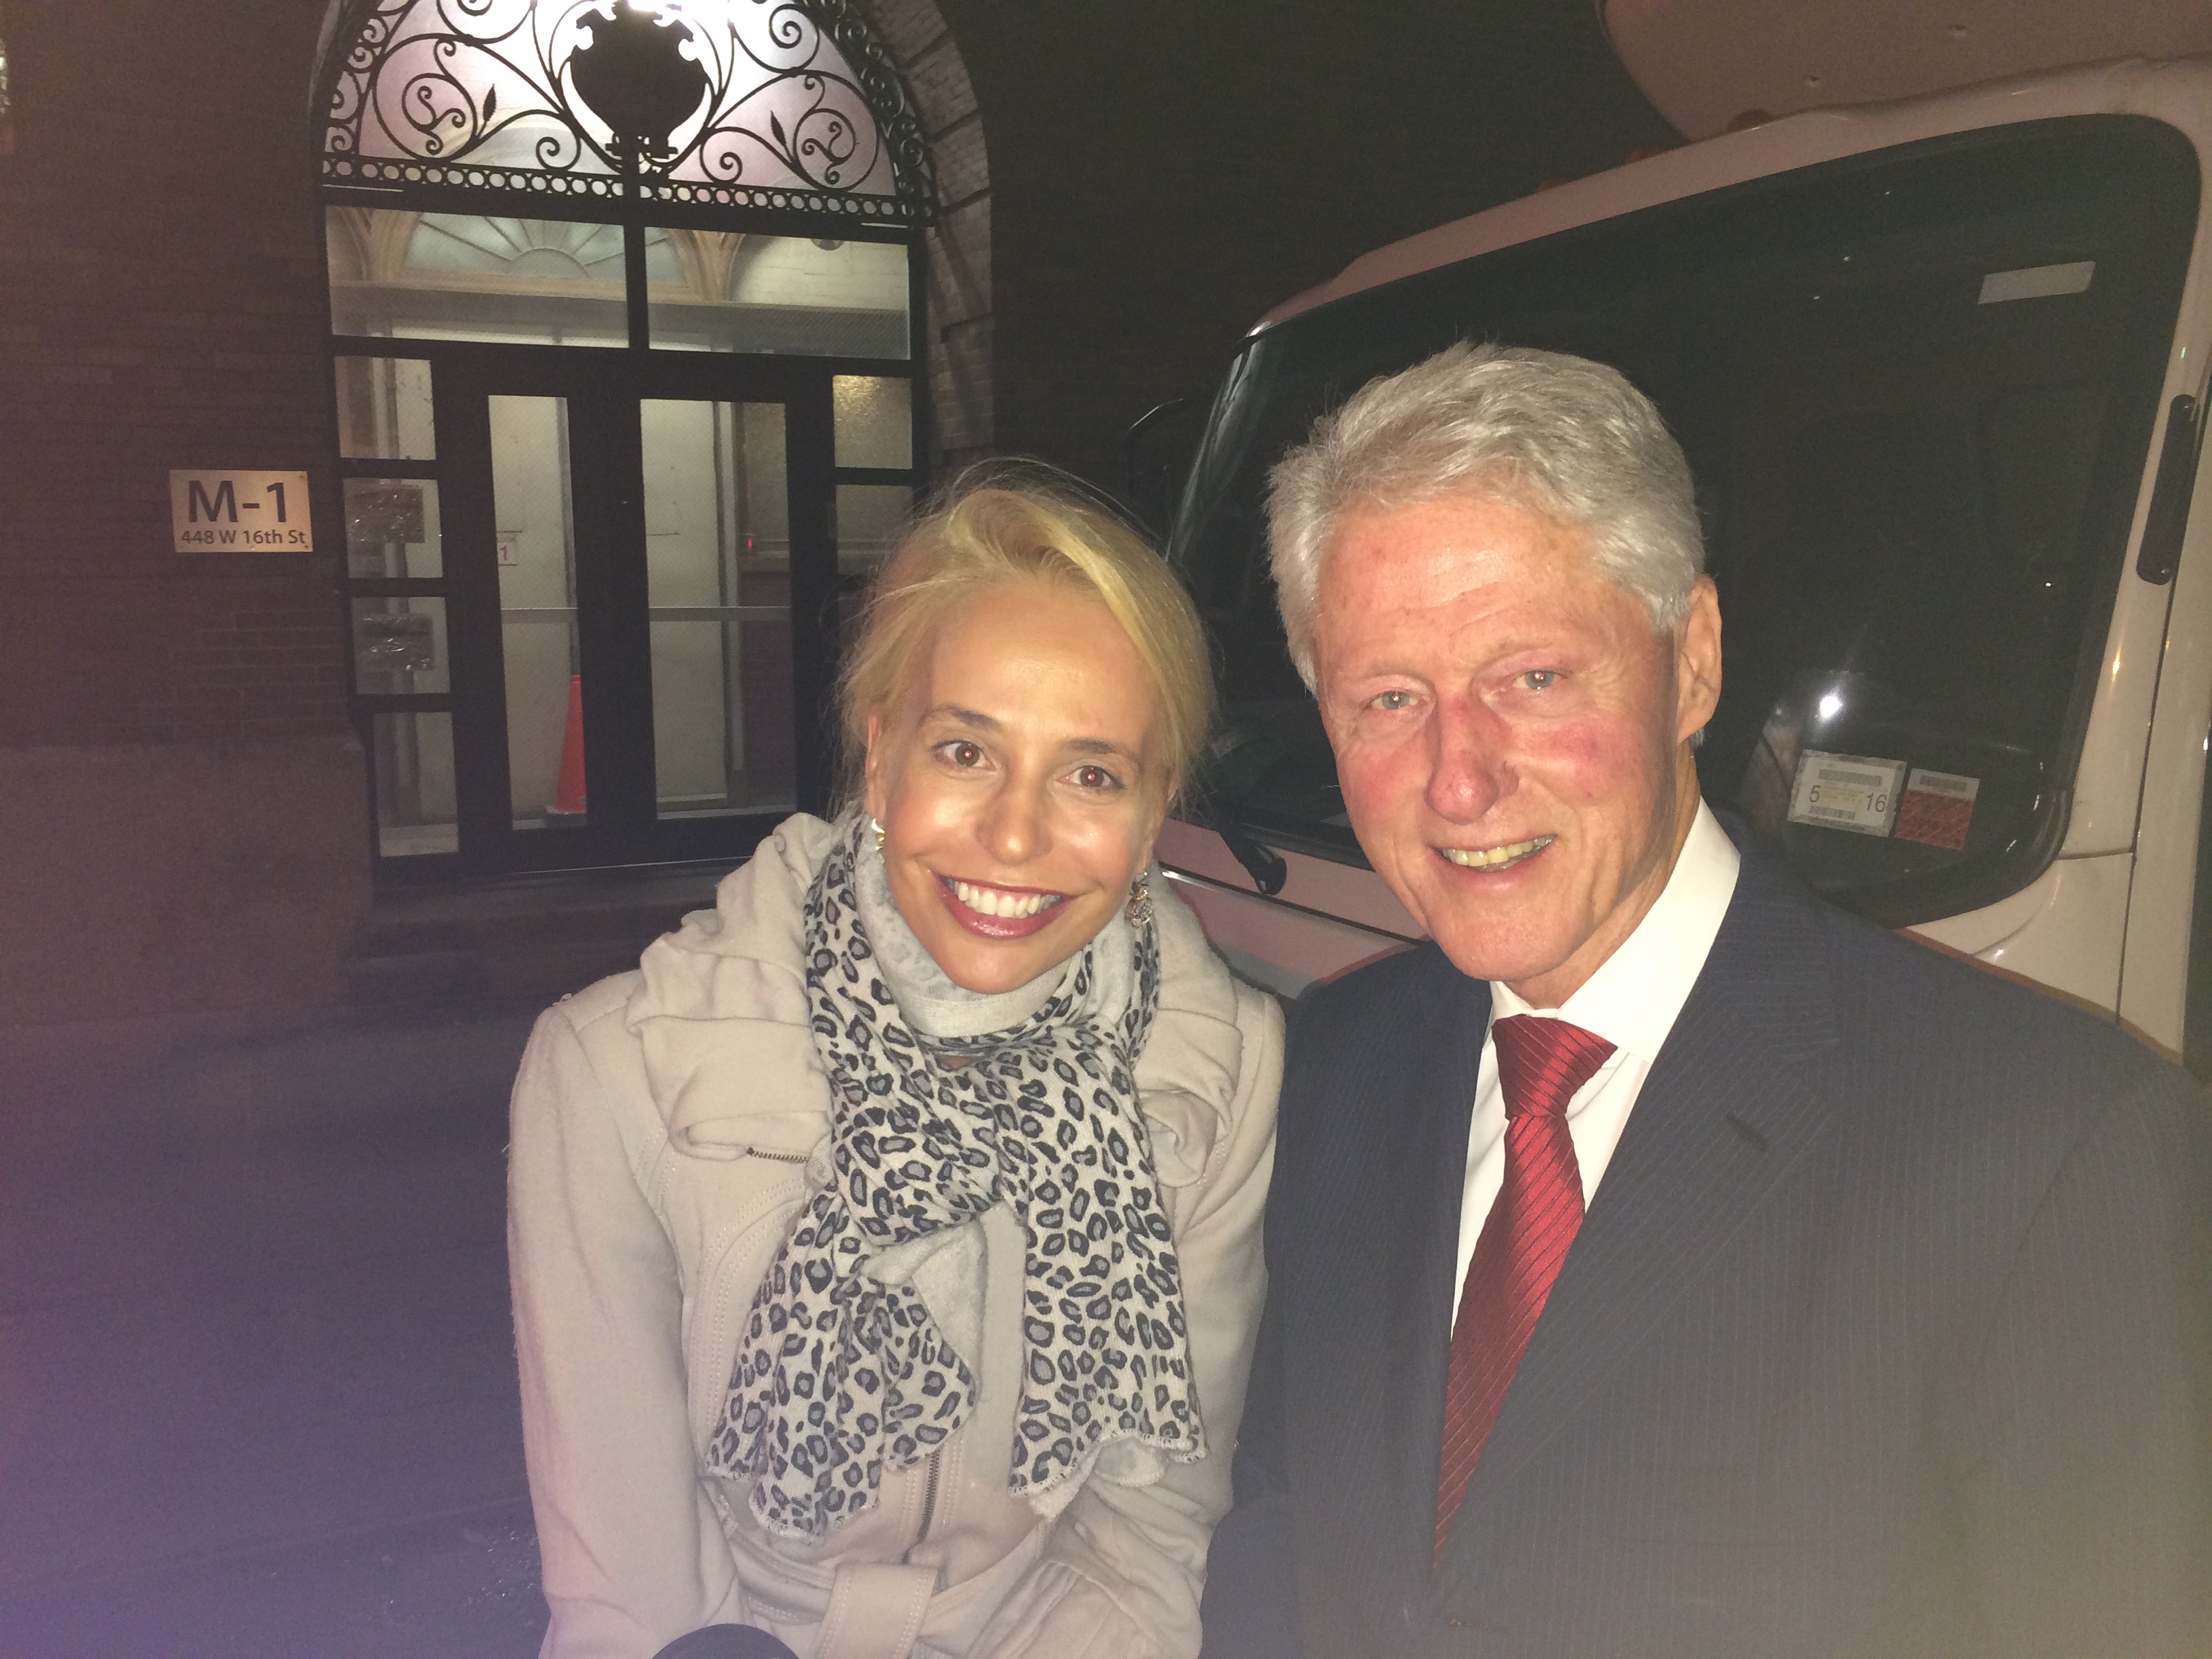 With the inspiring former president Bill Clinton